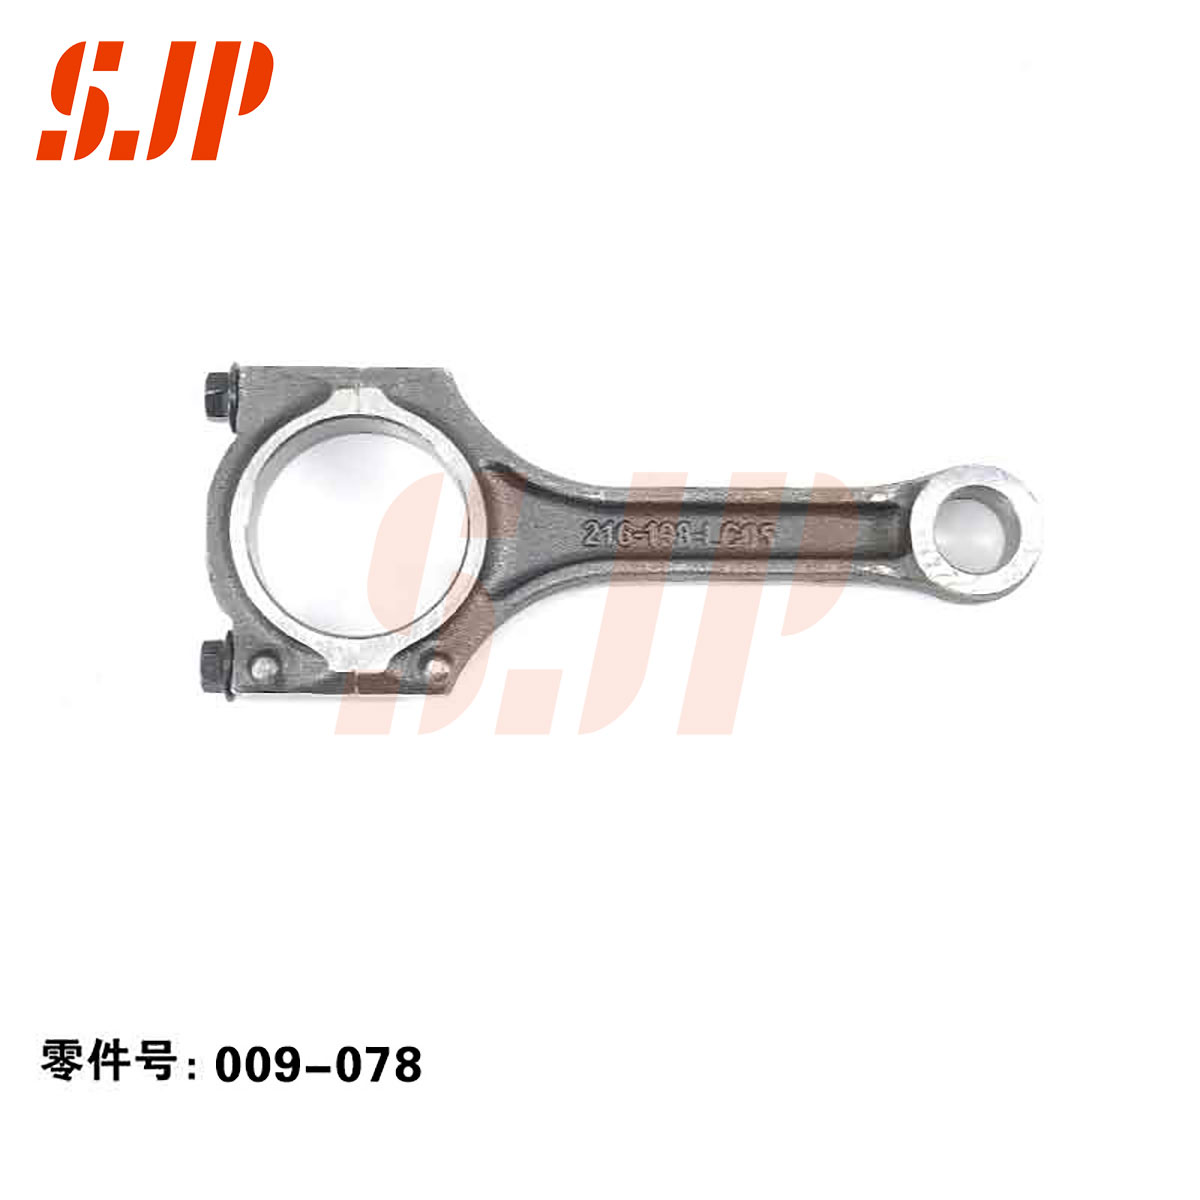 SJ-009-078 Connecting Rod For Excelle 1.6